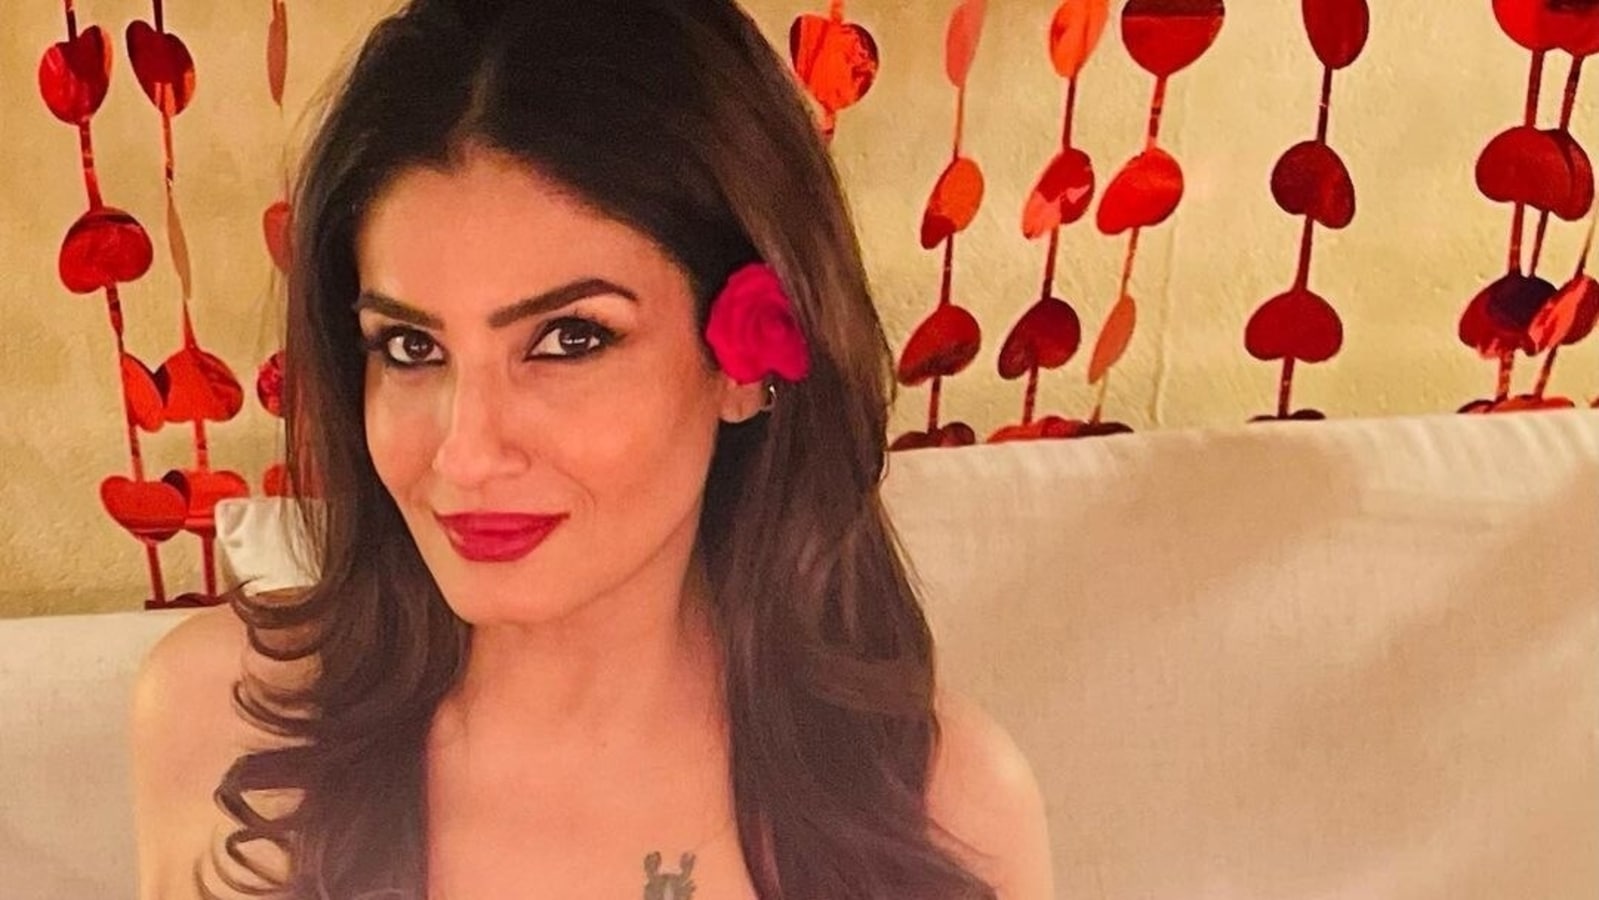 Raveena Tandon slips into red dress as she poses with red roses and candles, jokes about it